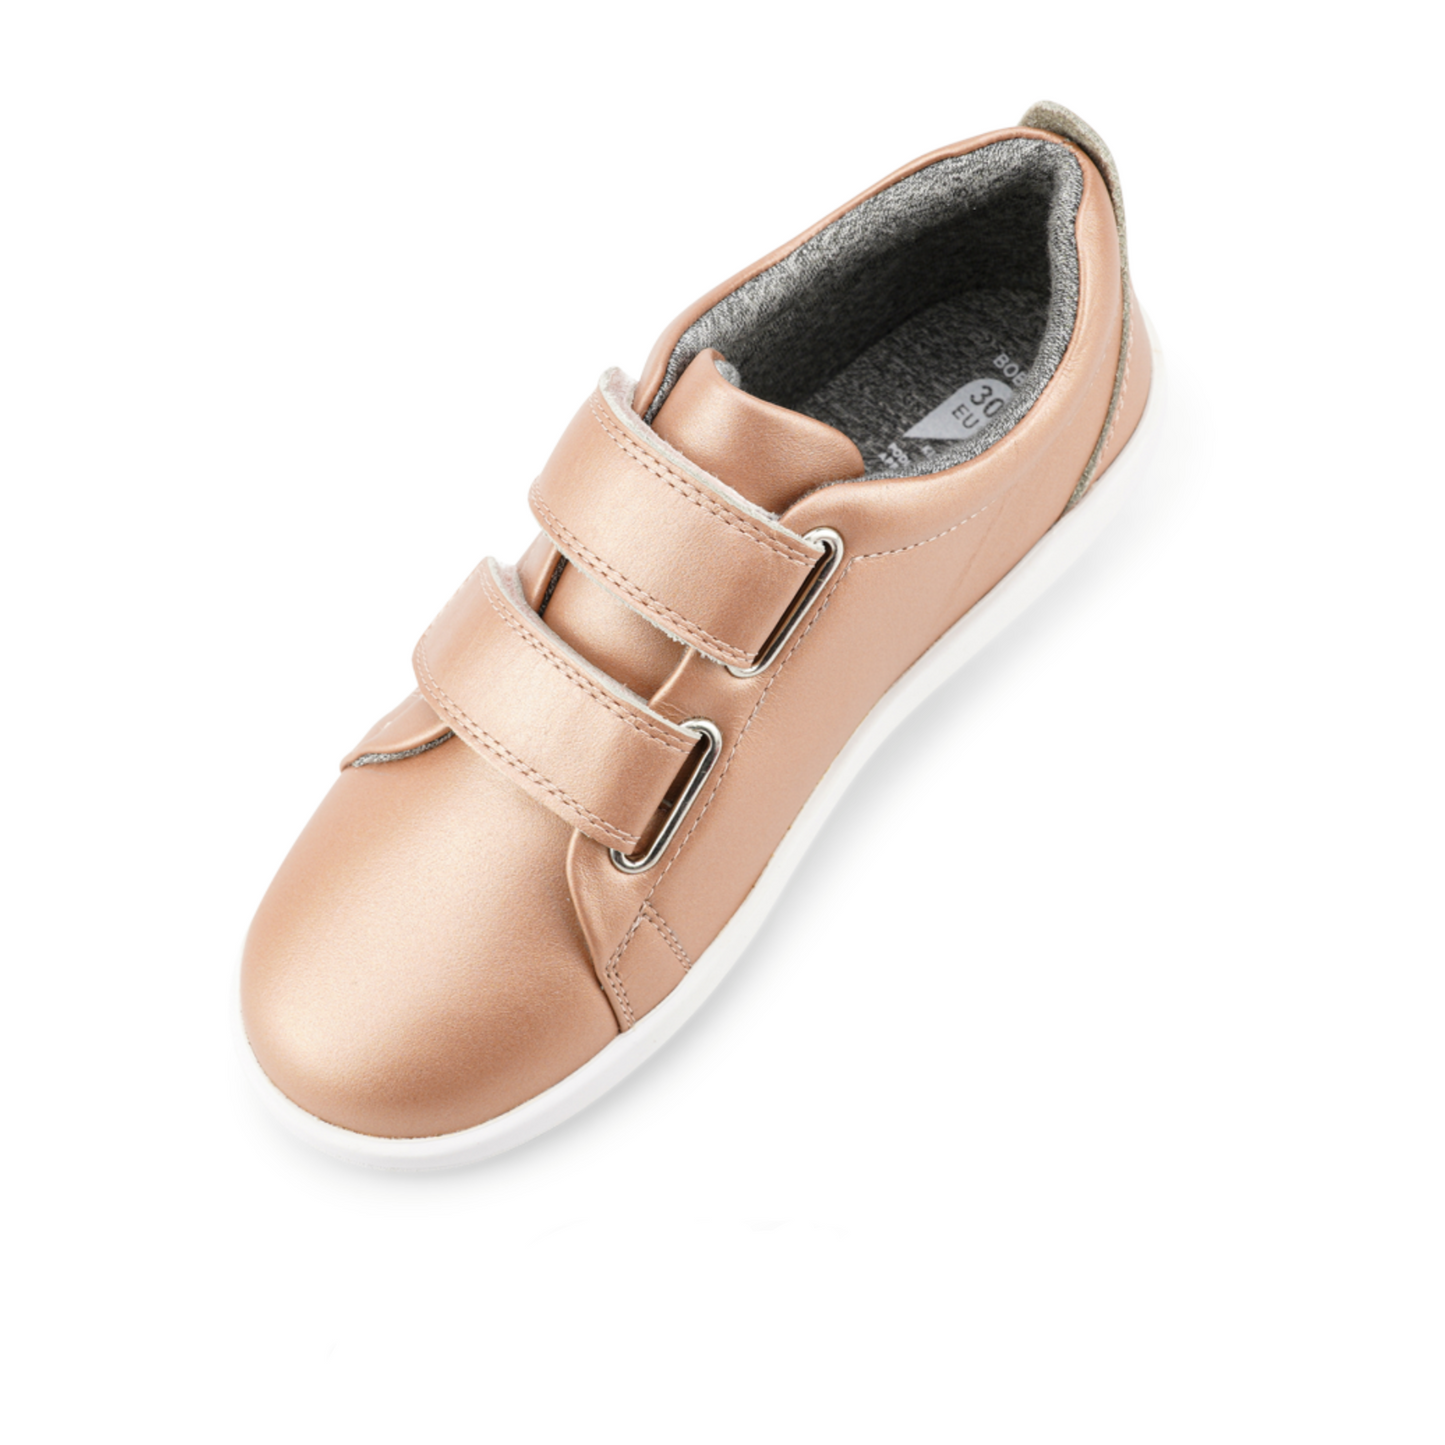 Bobux Grass Court Rose Gold Leather Trainers